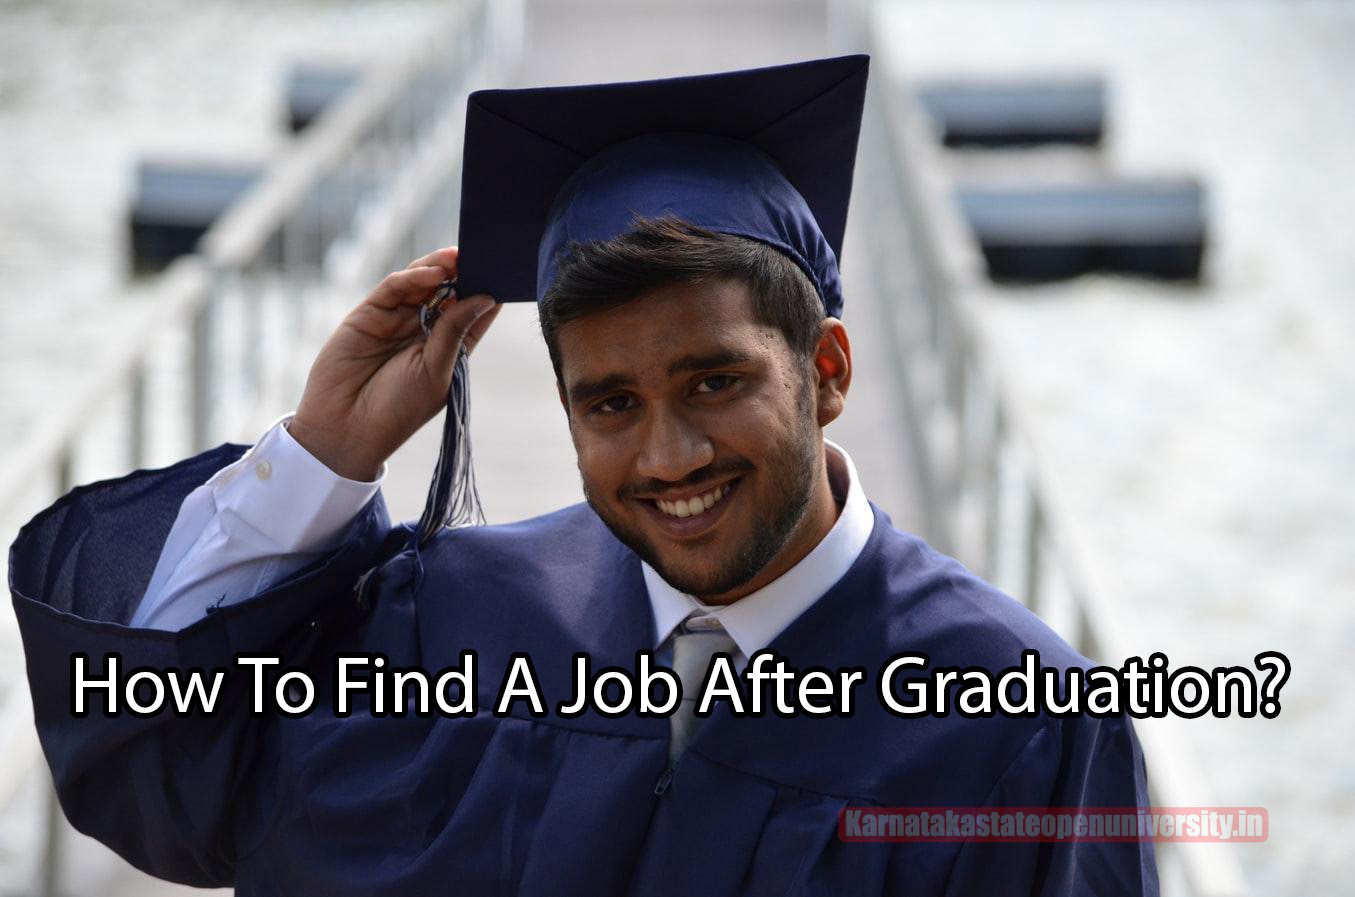 How To Find A Job After Graduation?